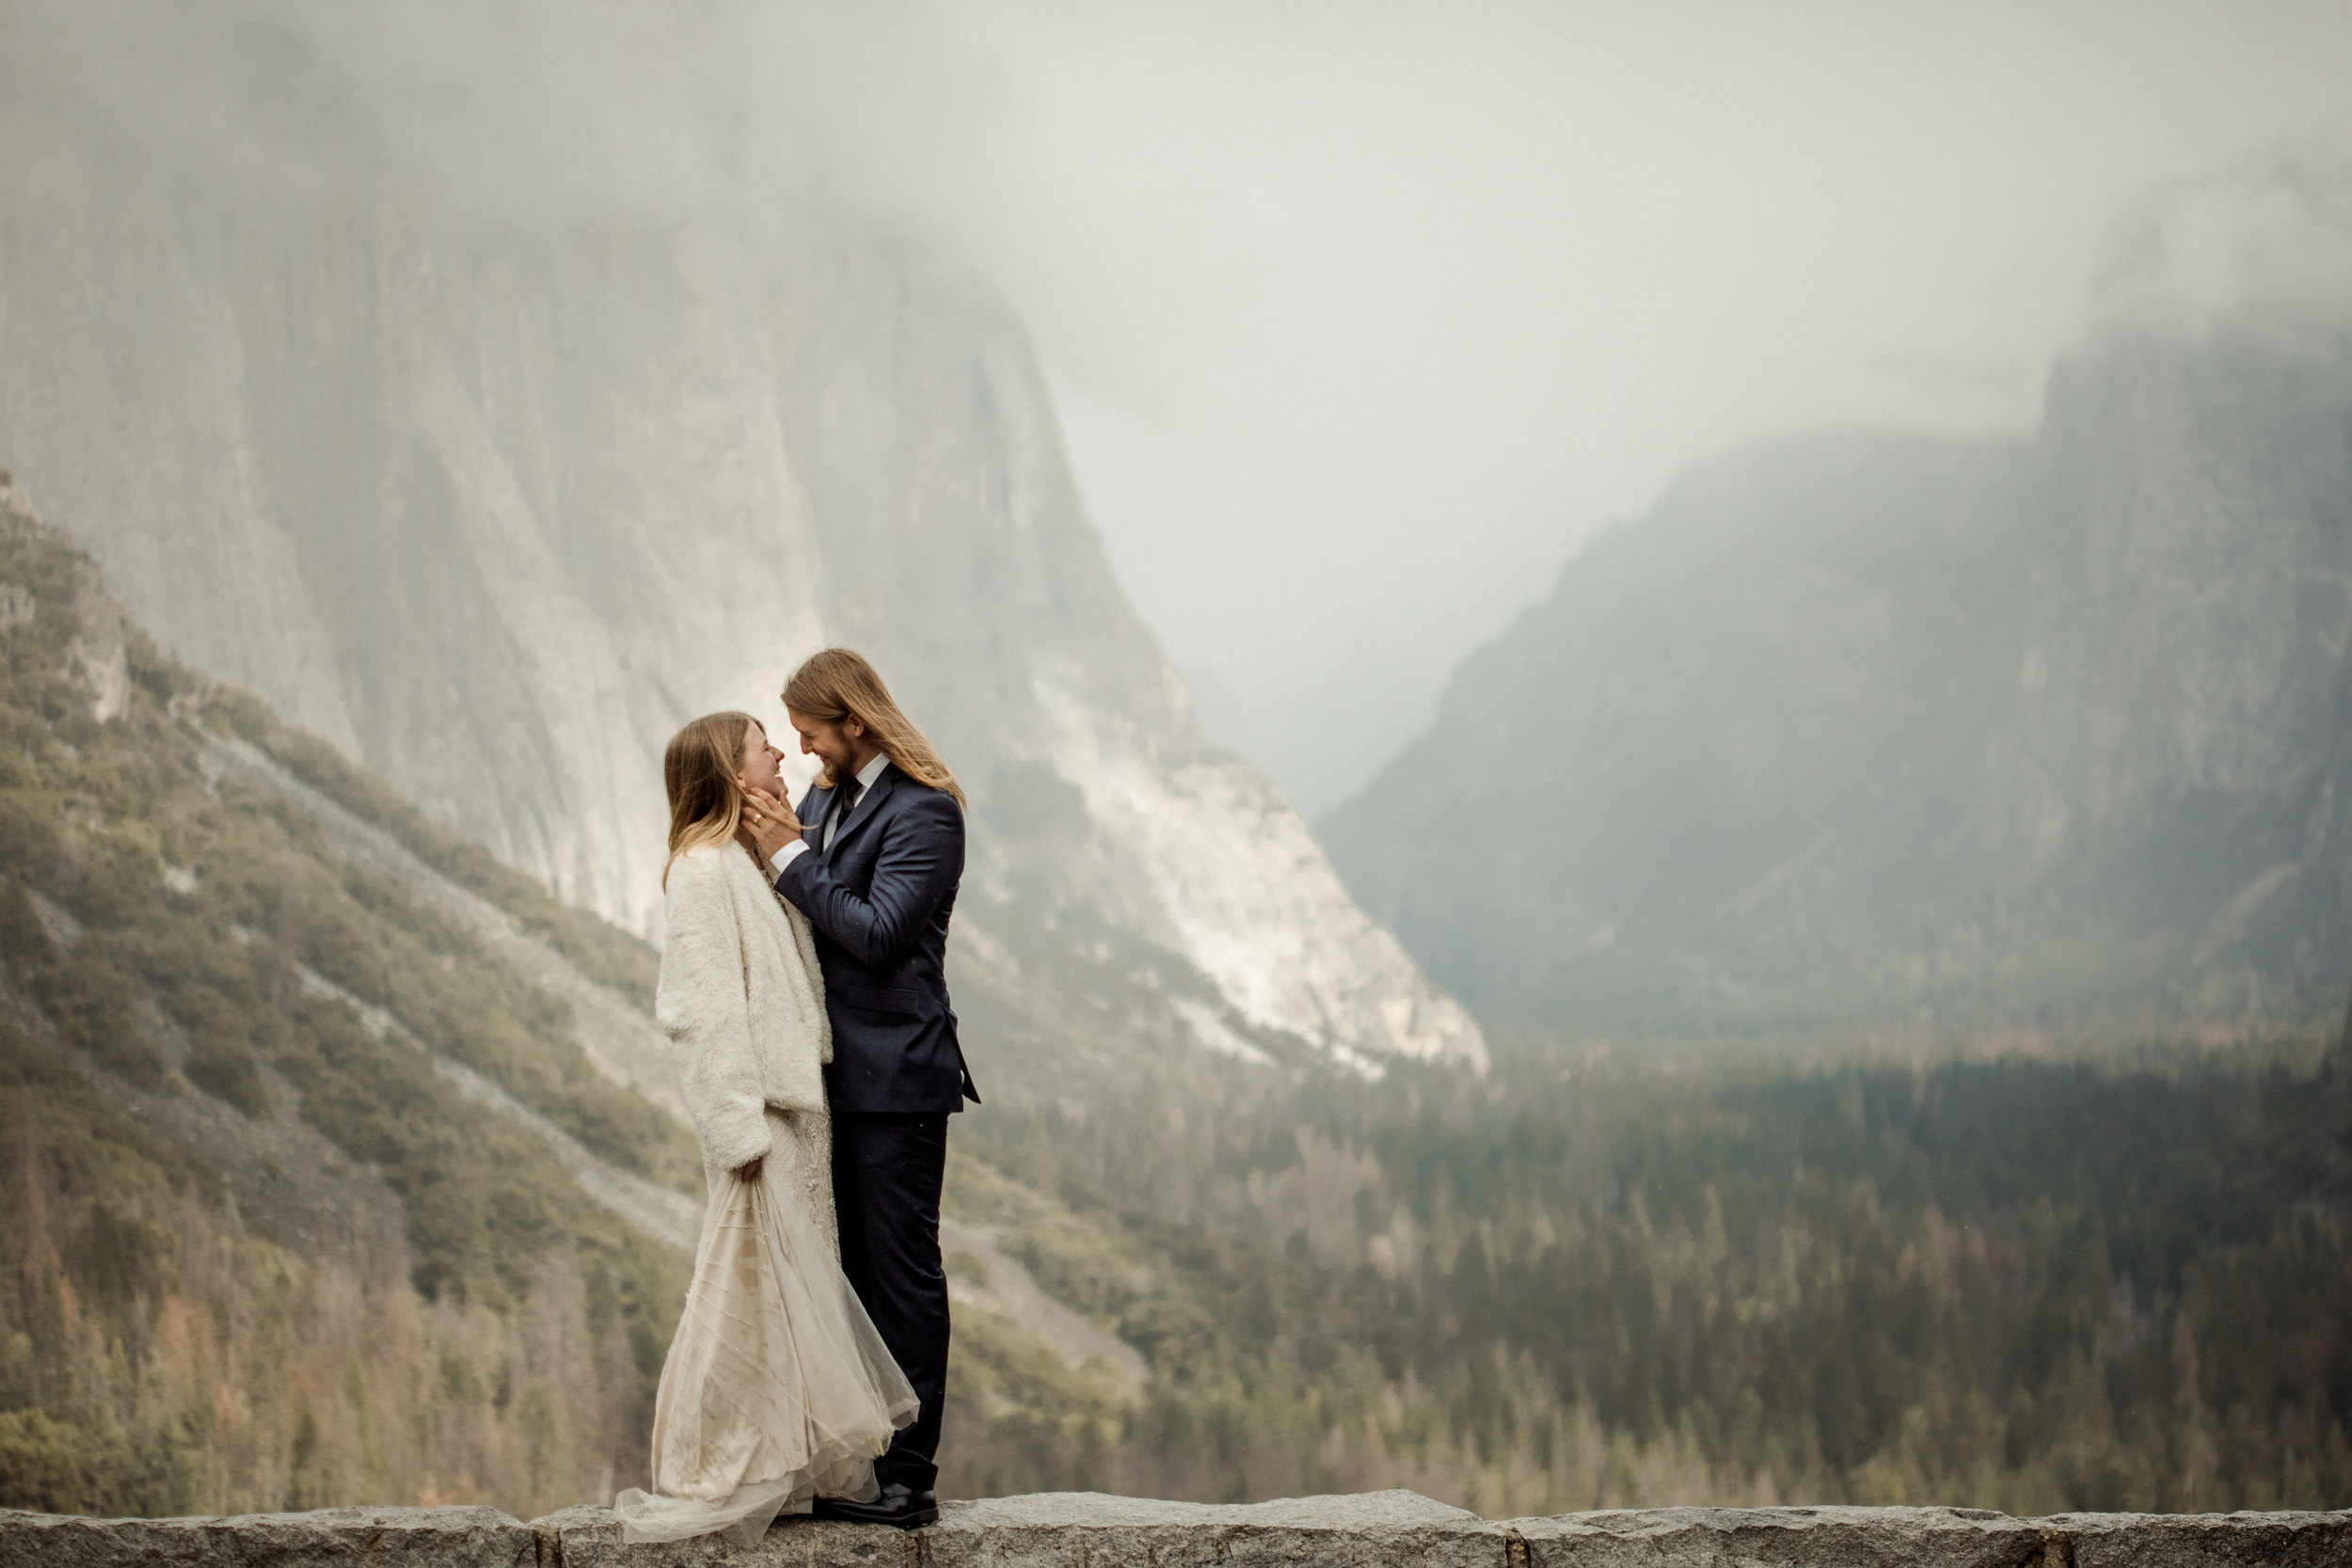 nicole-daacke-photography-yousemite-national-park-elopement-photographer-winter-cloud-moody-elope-inspiration-yosemite-valley-tunnel-view-winter-cloud-fog-weather-wedding-photos-7.jpg